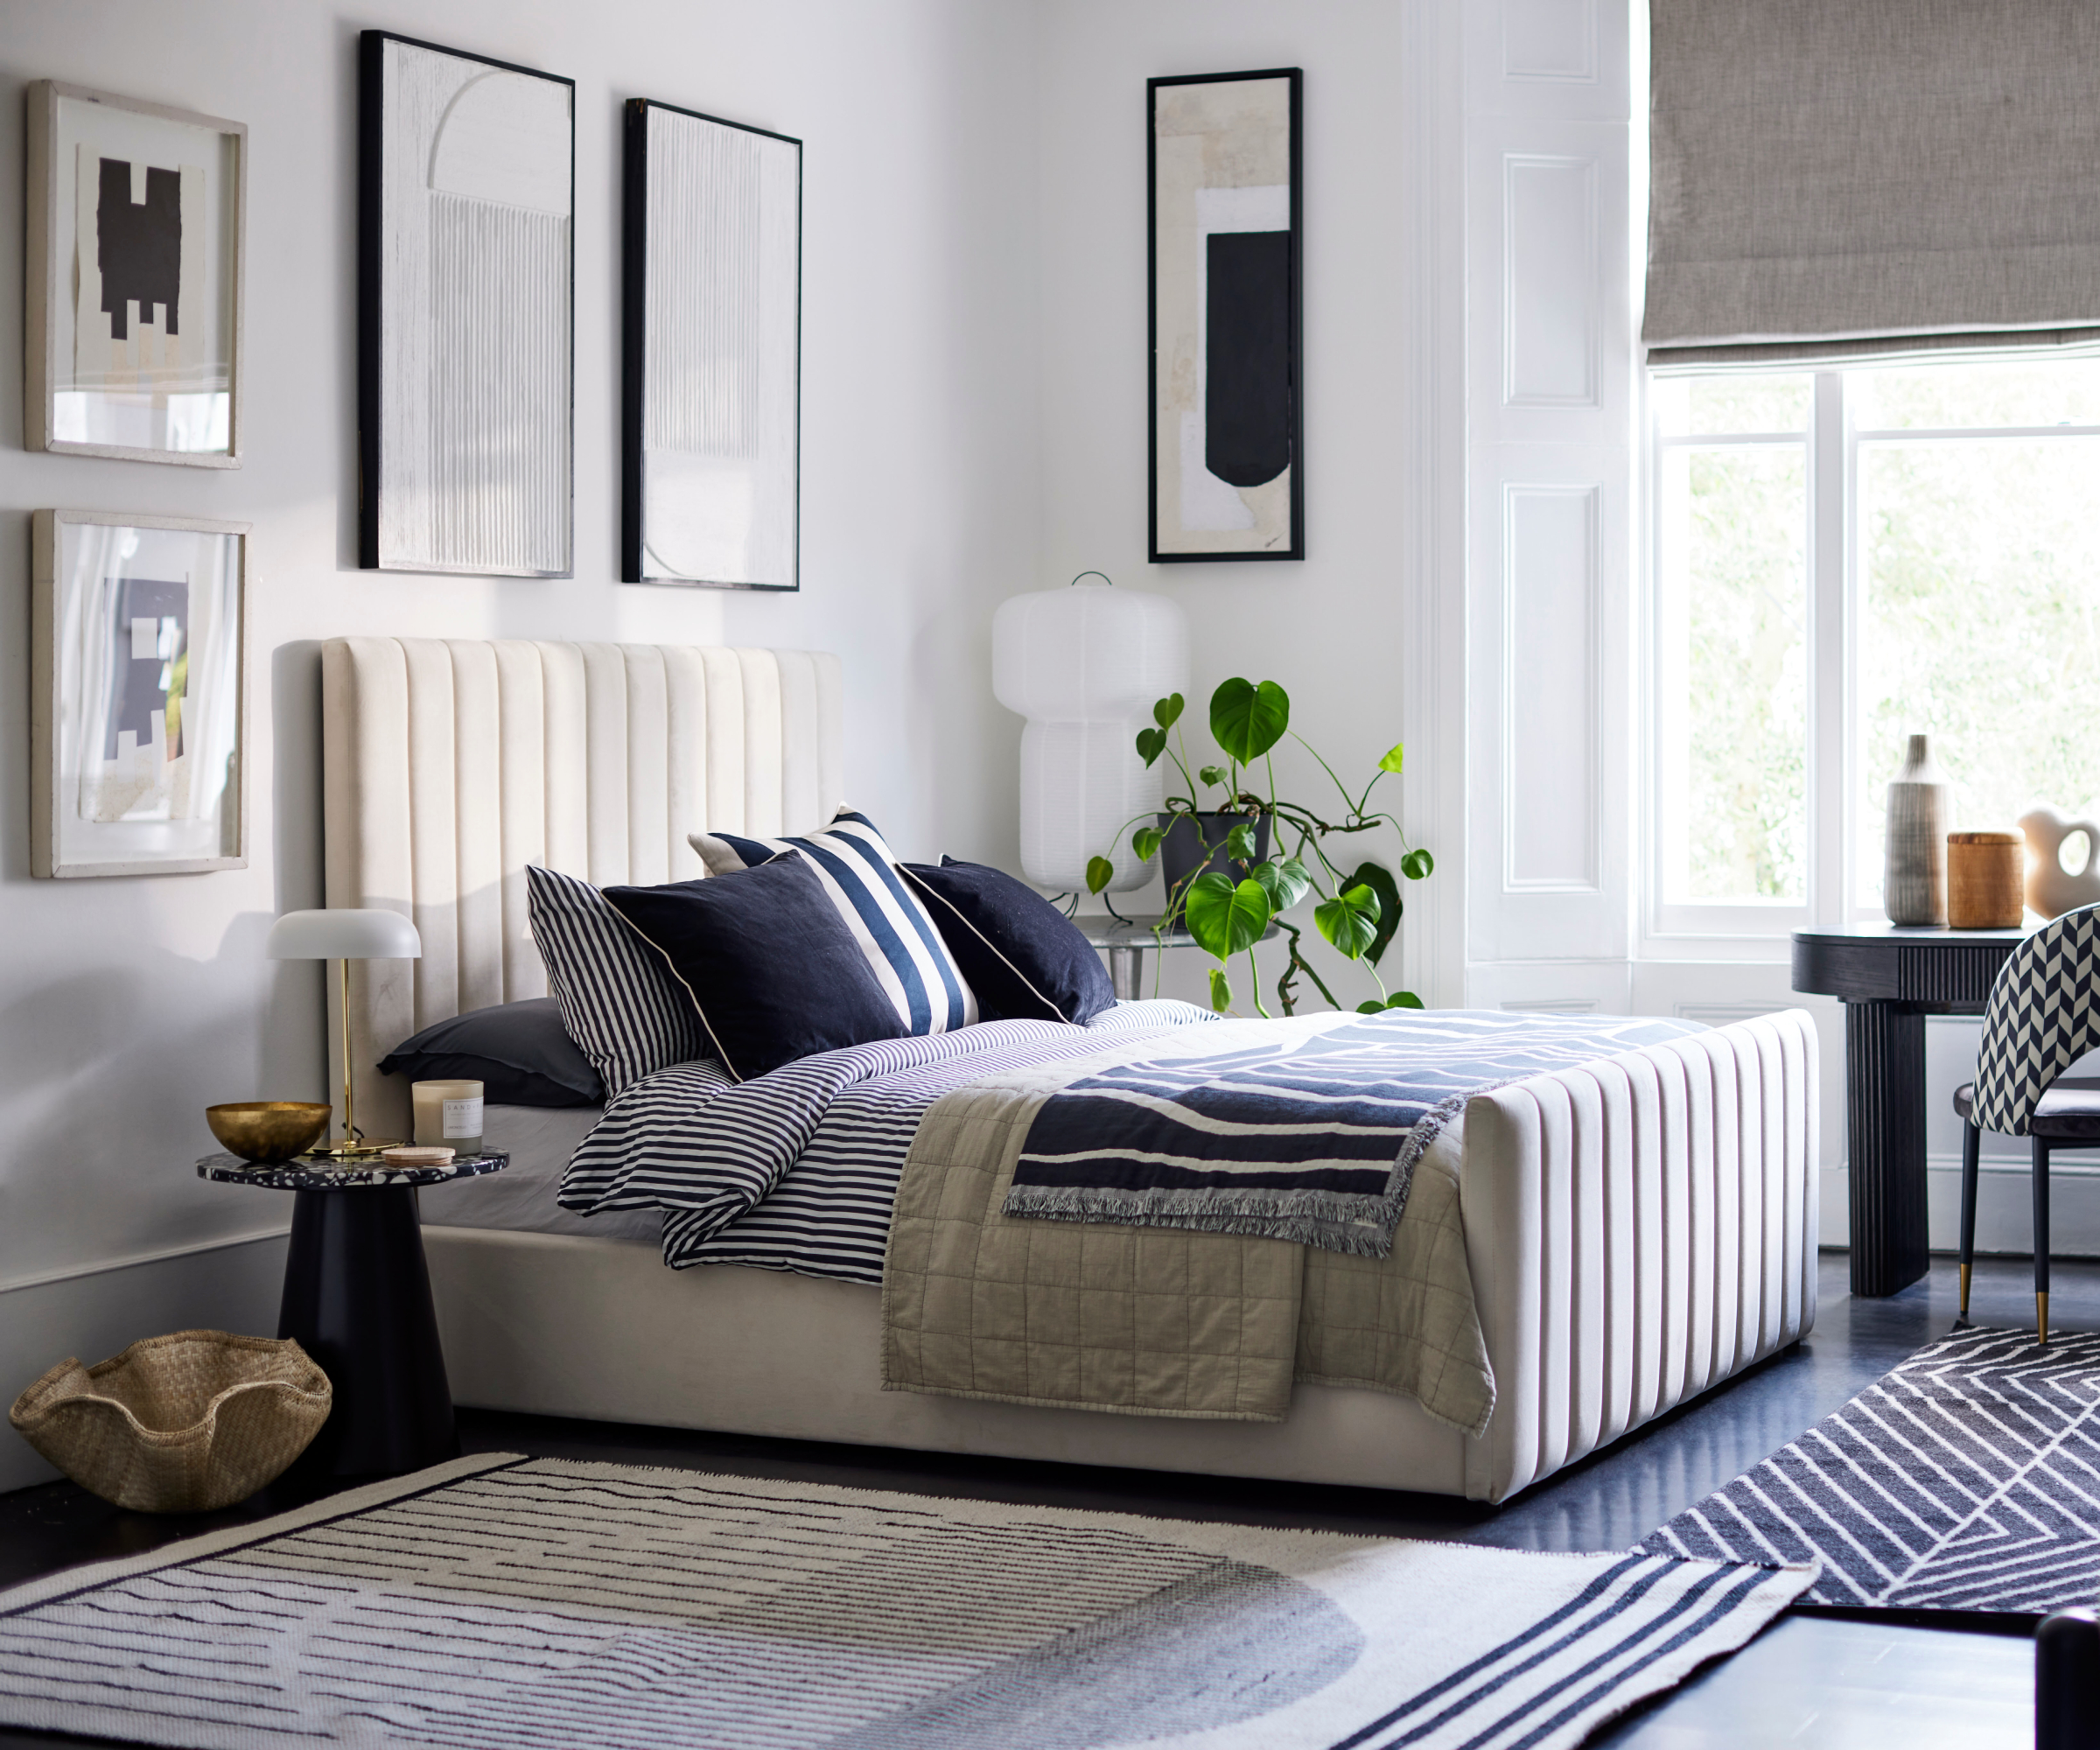 monochrome bedroom scheme with white walls and graphic wall art